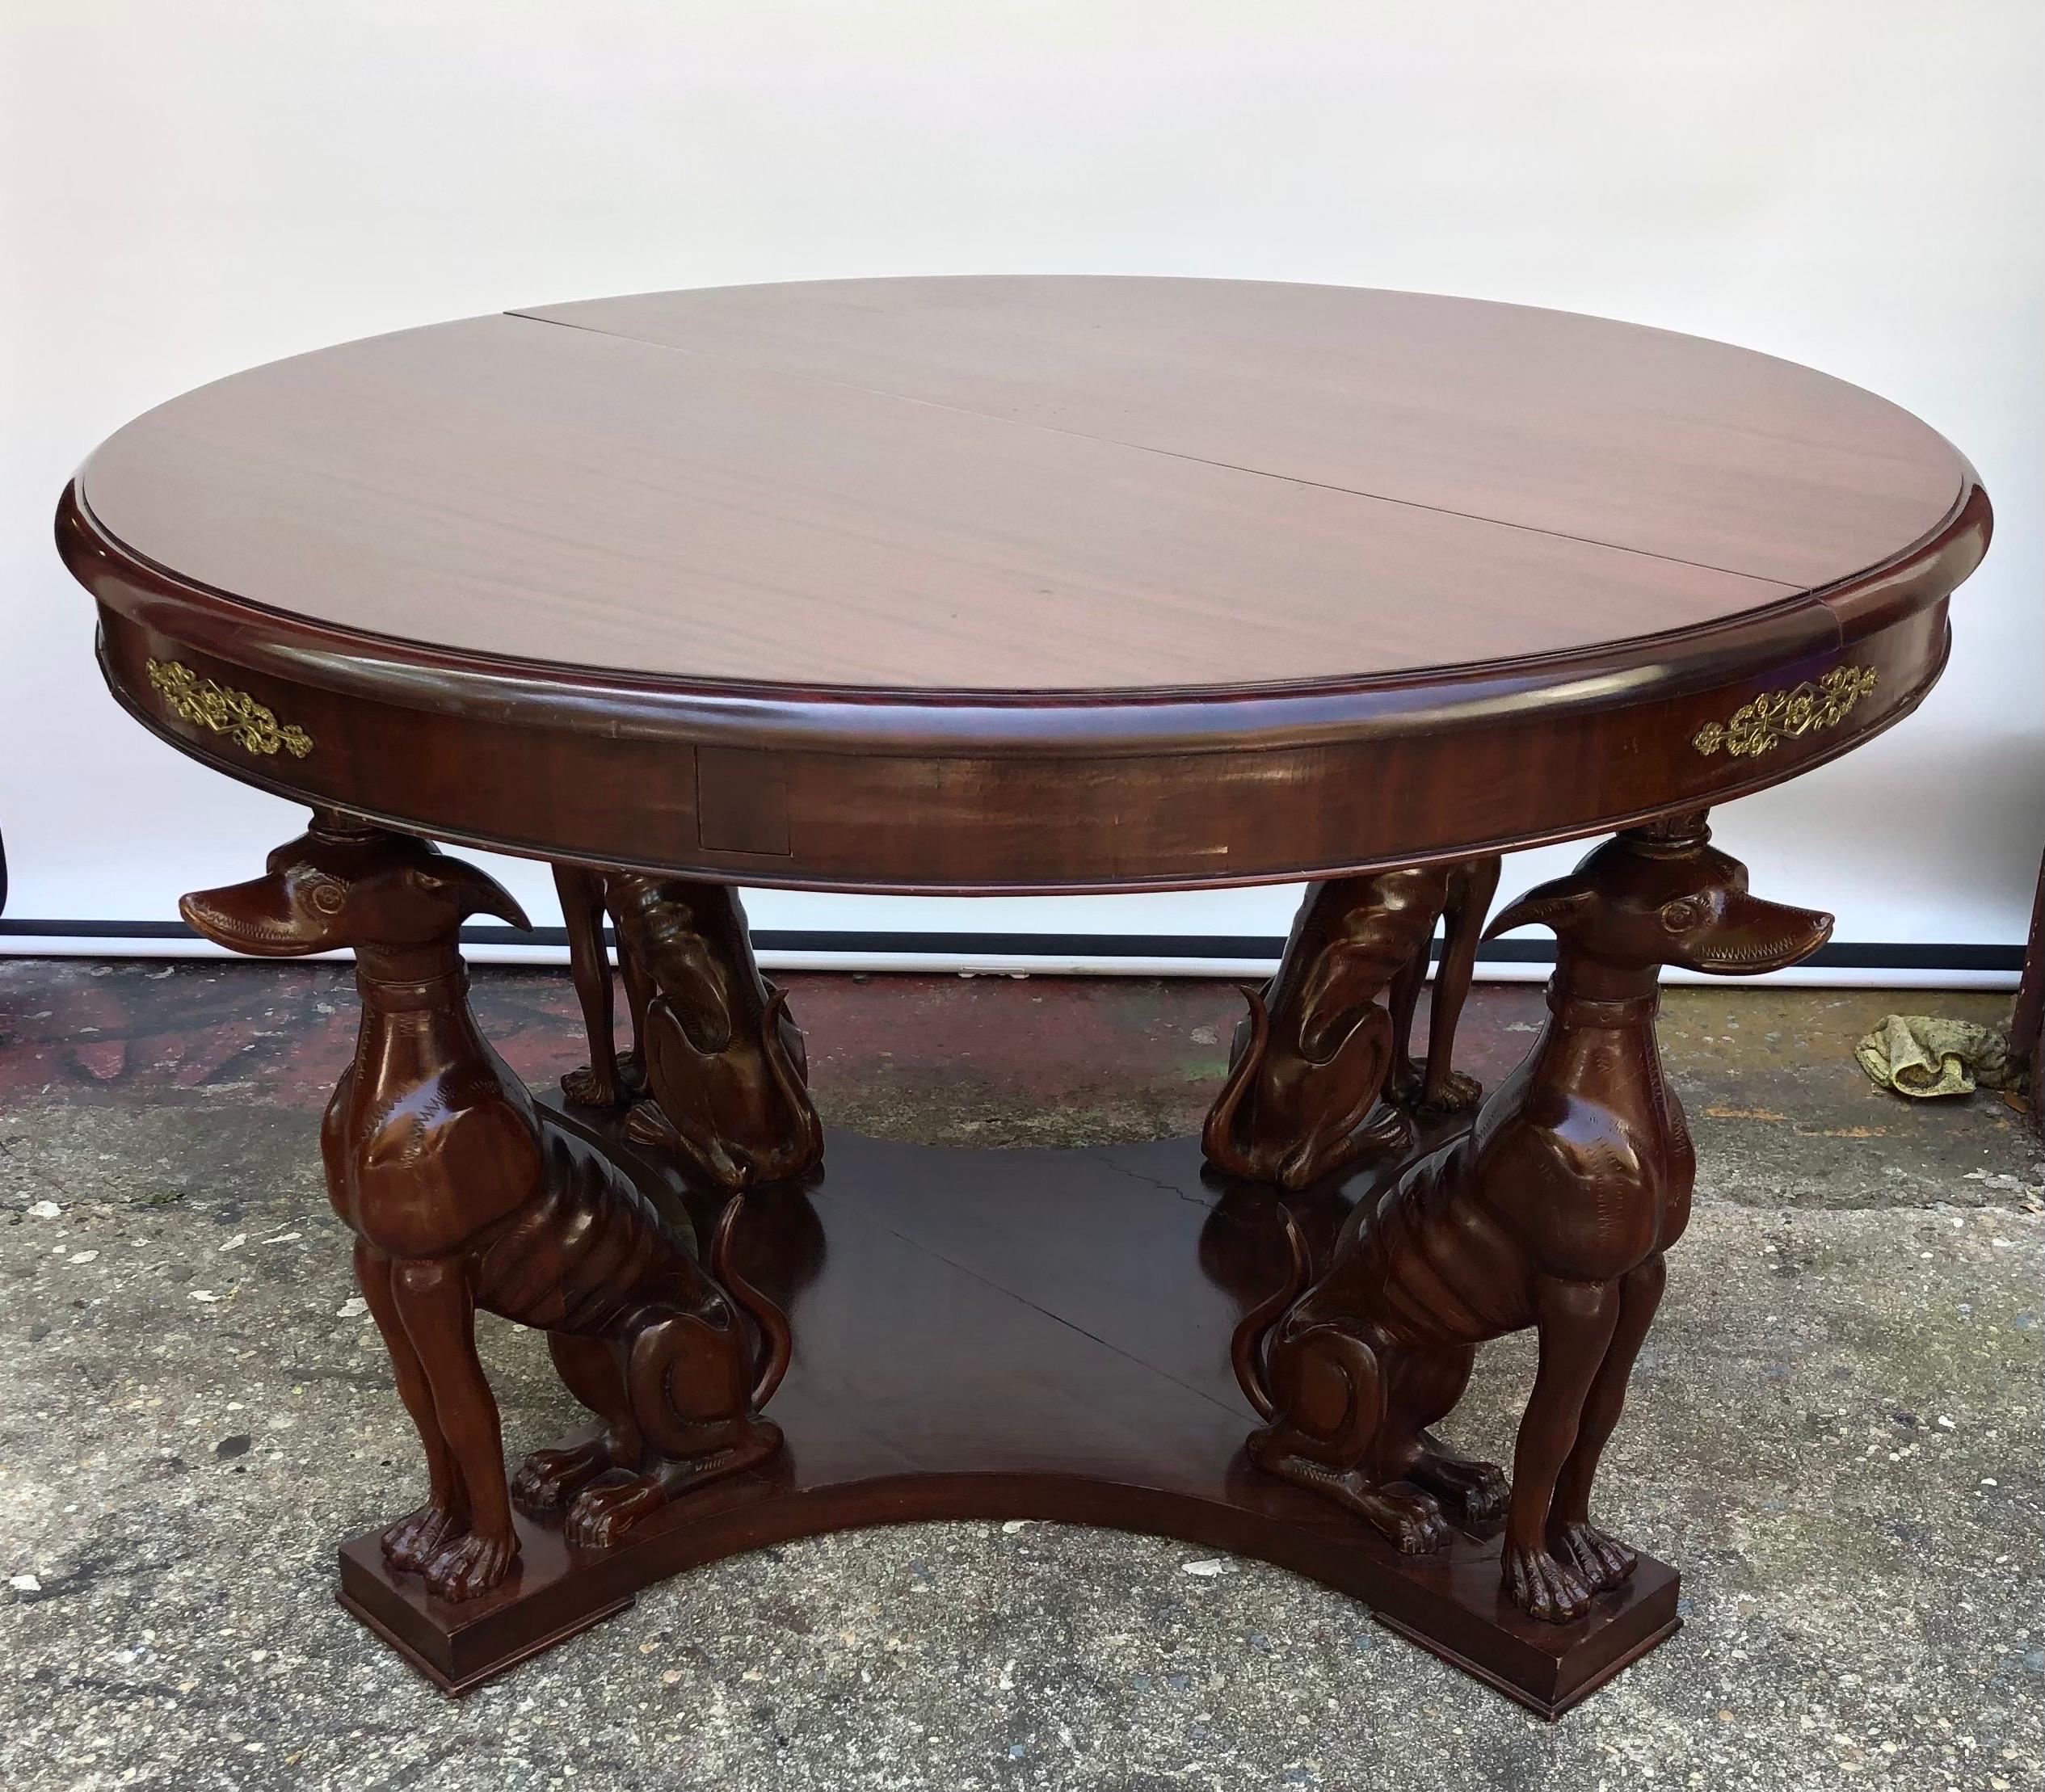 Neapolitan Art Deco Whippet Center/Dining Table with Bronze Mounts, Early 20th C In Good Condition For Sale In Charleston, SC